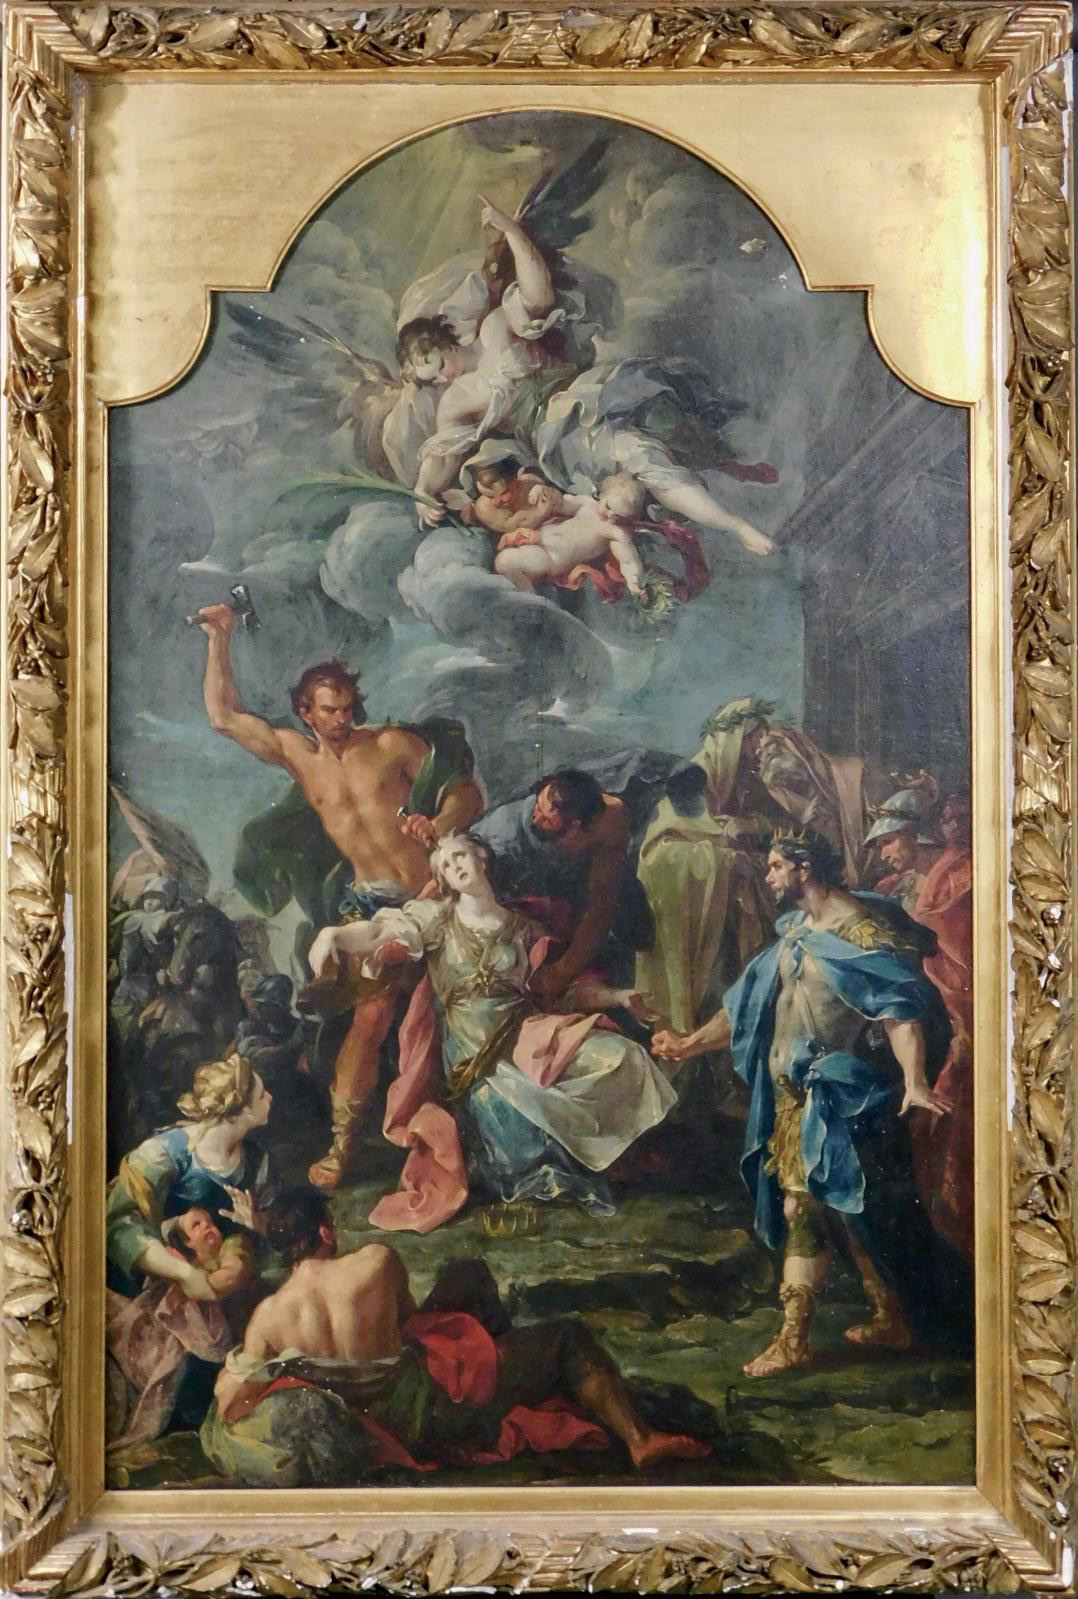 The Martyrdom of a Saint by Giaquinto